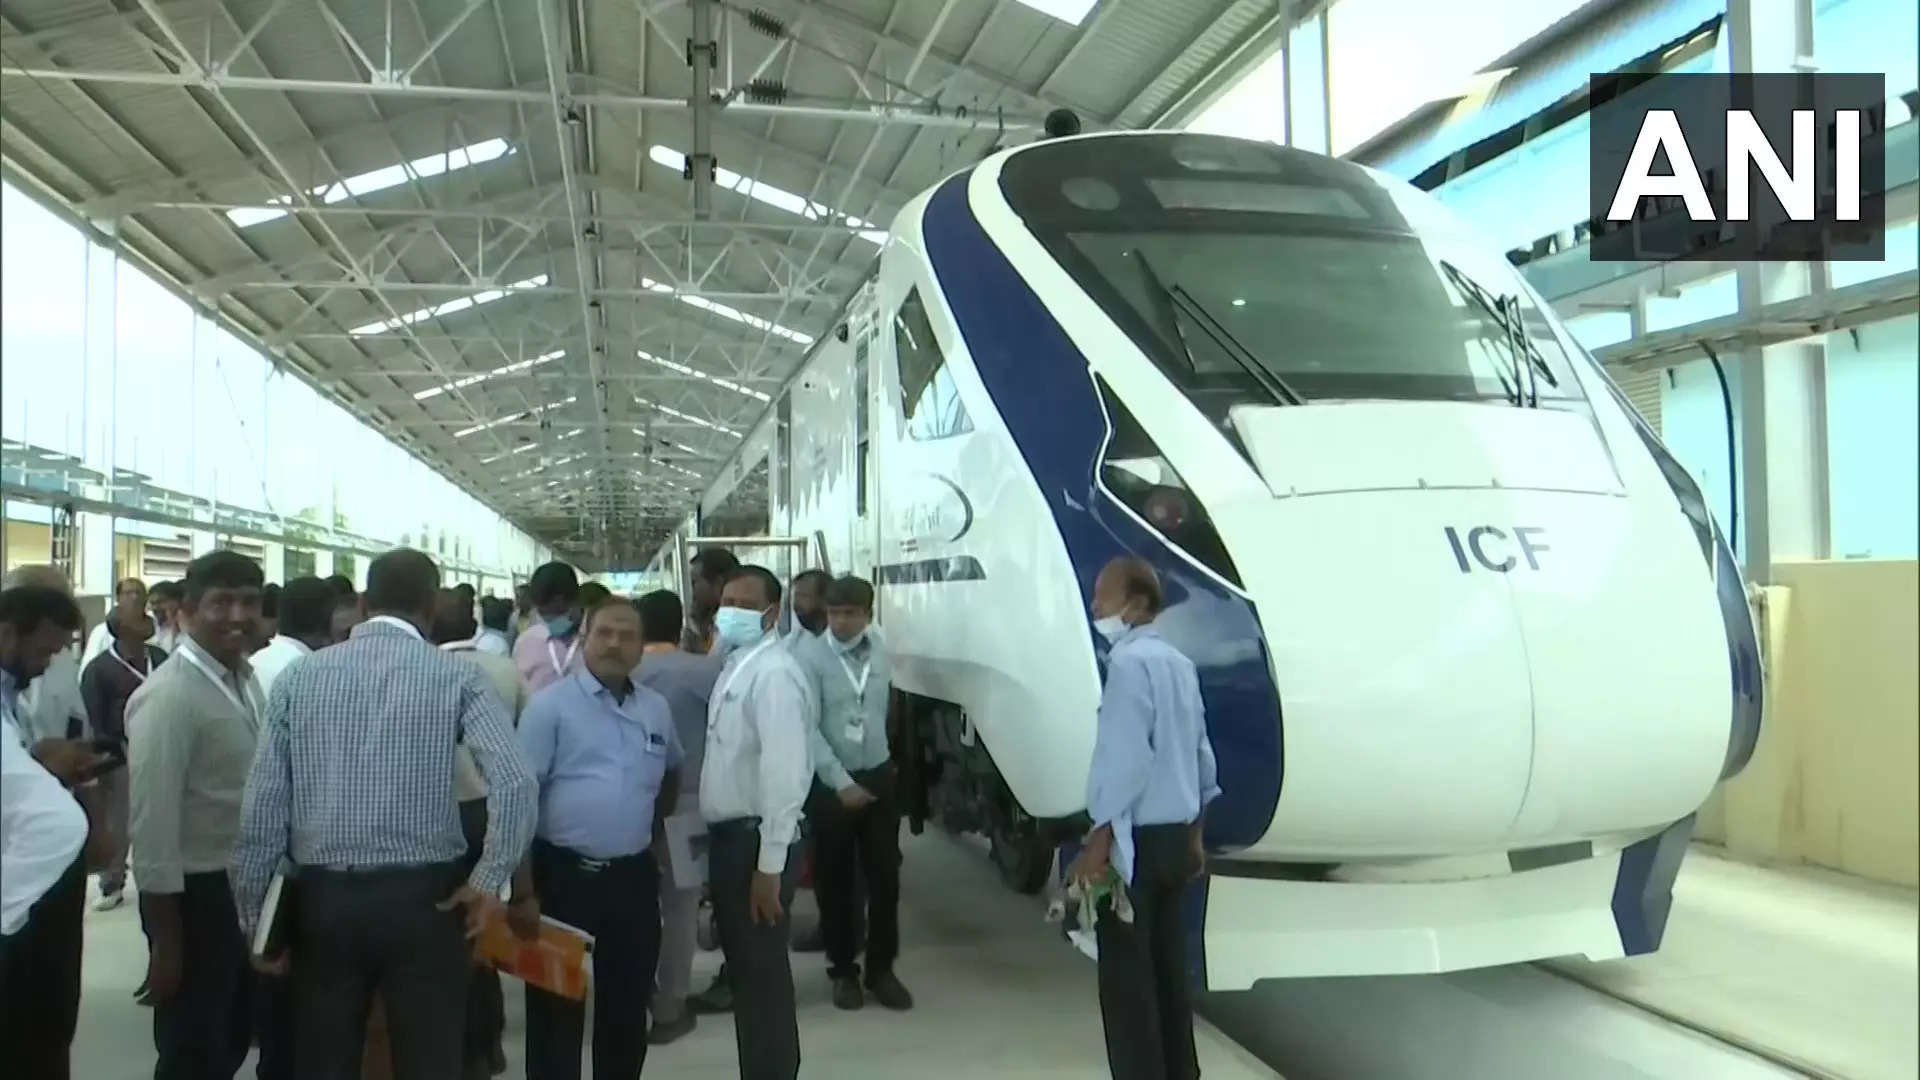 Chennai Union Minister of Railways visits Chennai for inspection of newly built Vande Bharat train